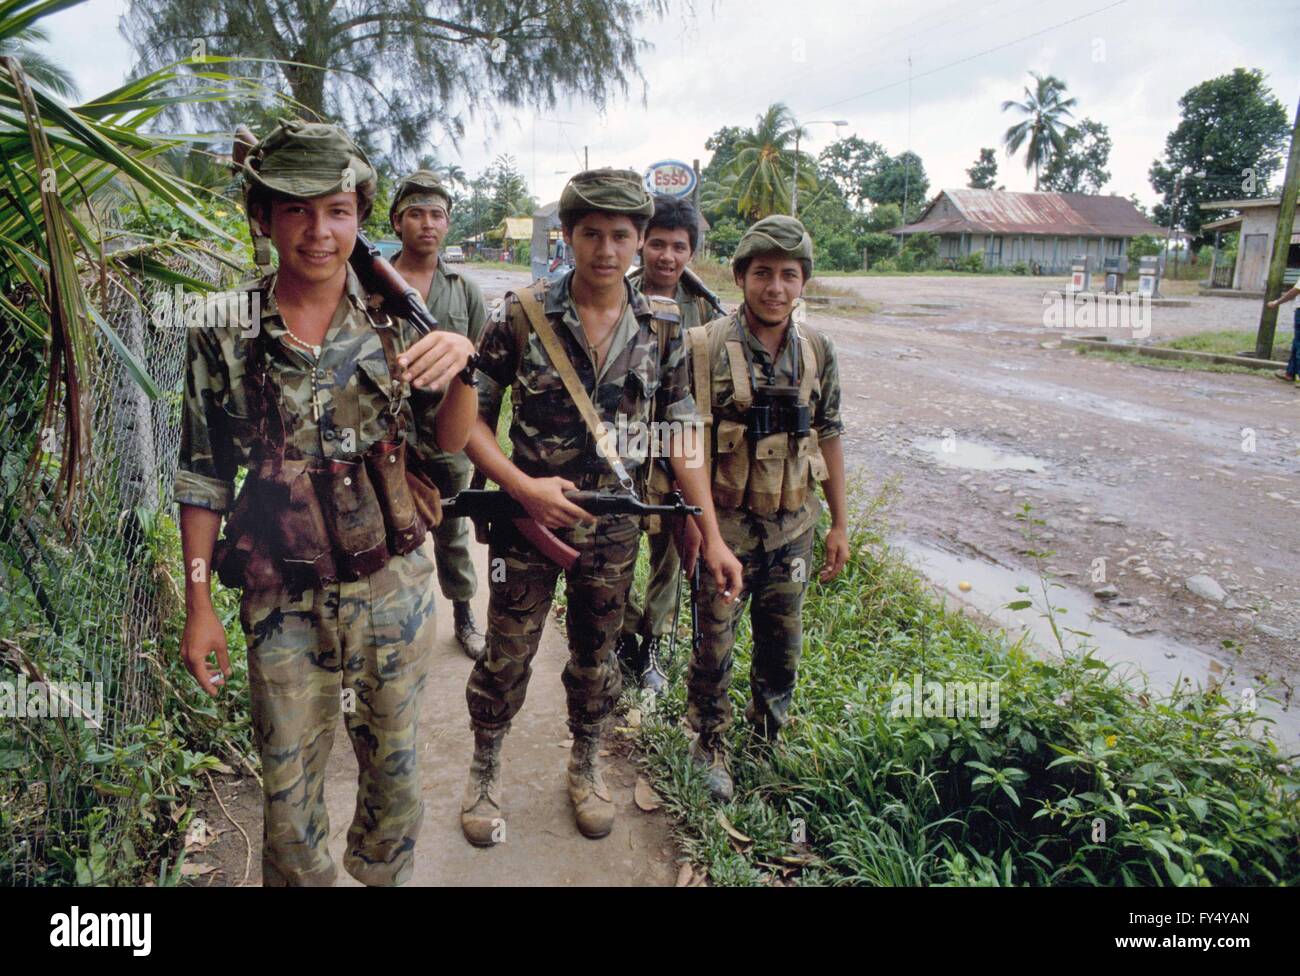 Nicaragua, January 1988, soldiers of Sandinista army in Rama town Stock Photo